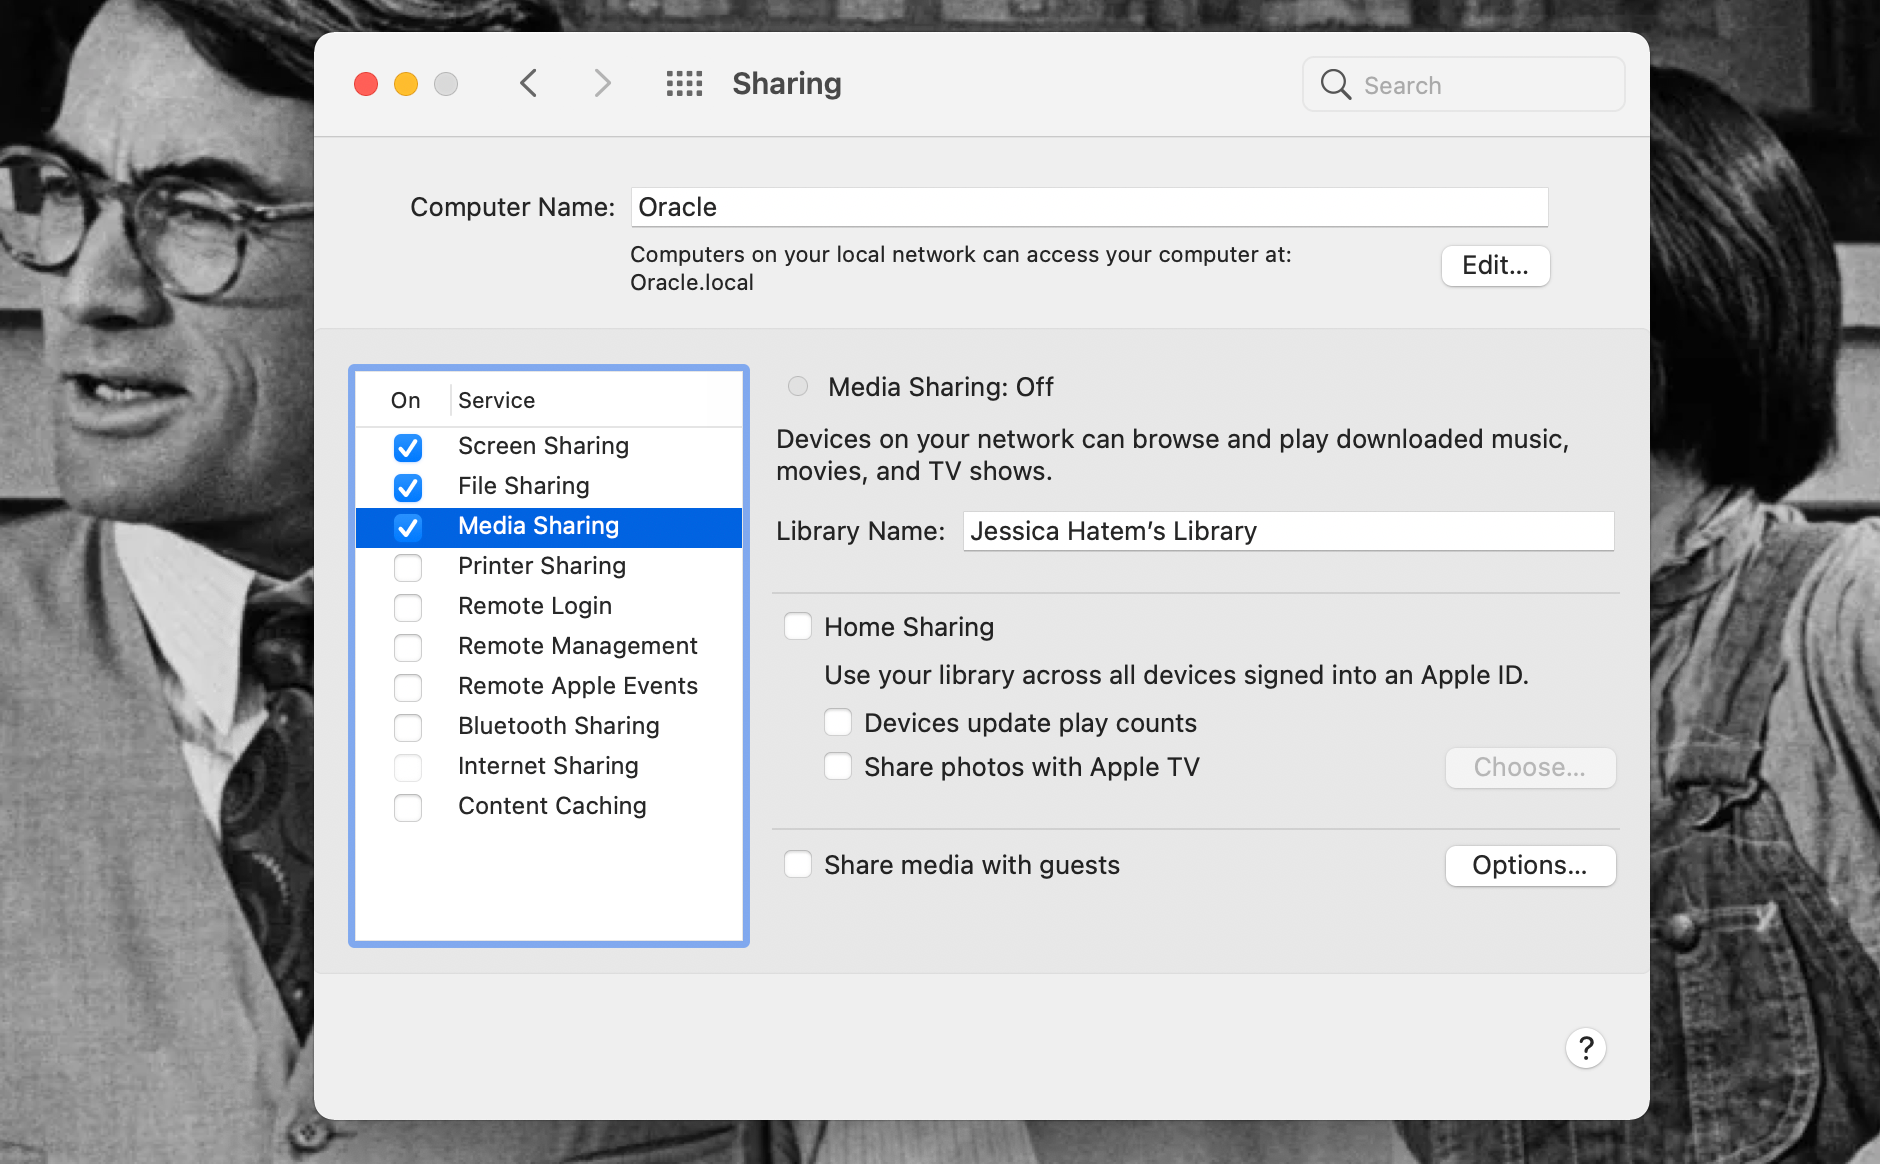 Media Sharing settings open in System Preferences on a MacBook Pro